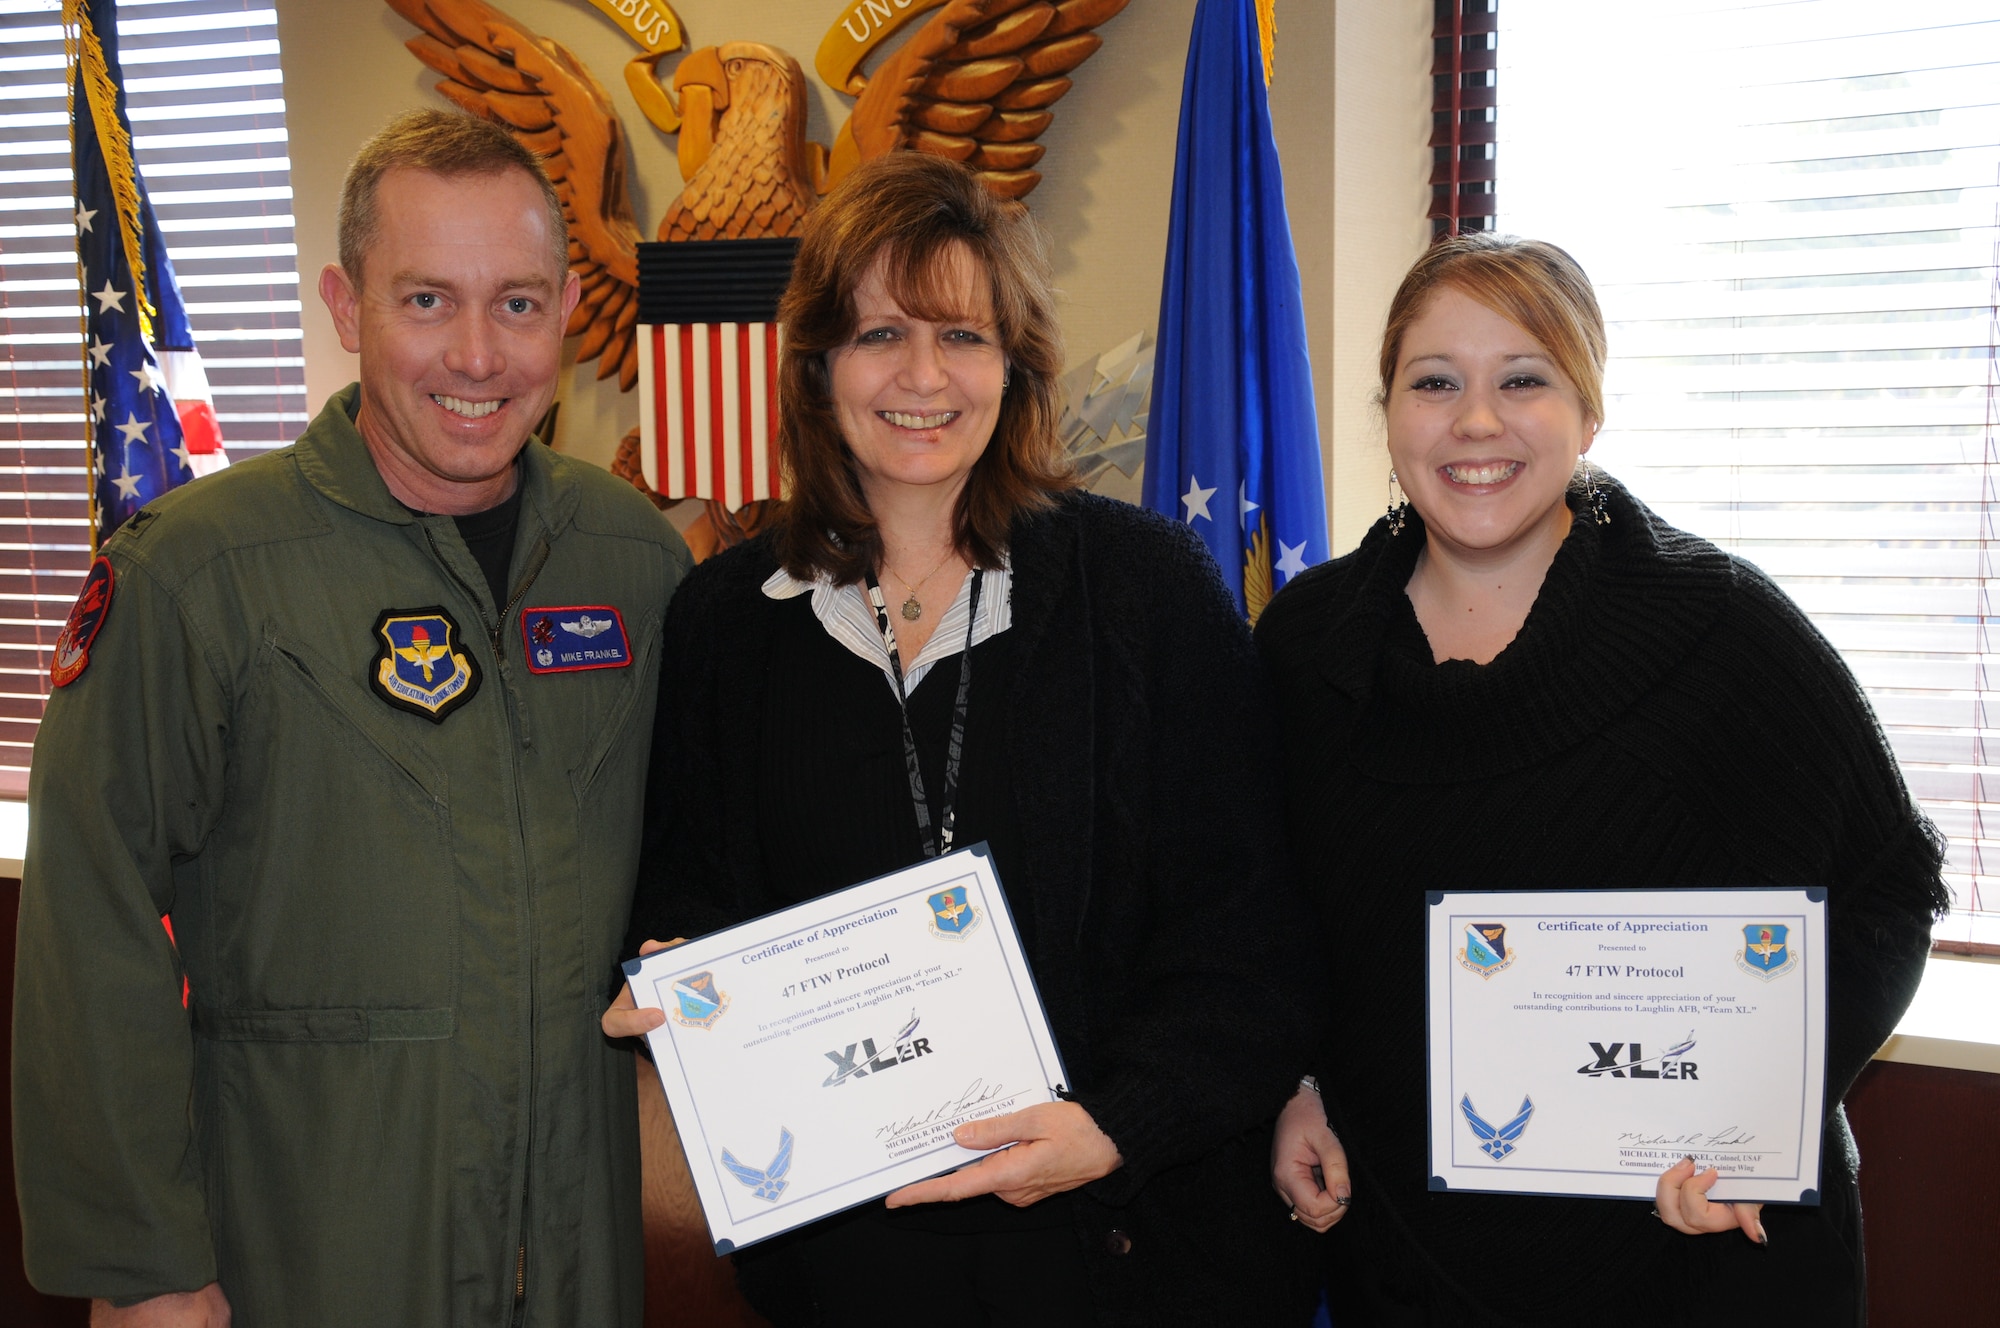 LAUGHLIN AIR FORCE BASE, Texas – Michele Perez and Kim Vaughn, both of 47th Flying Training Wing Protocol, pose with Col. Michael Frankel, 47th FTW commander, after being presented the XLer of the Week award Feb. 9. The XLer is a weekly award chosen by wing leadership and given to those who consistently make outstanding contributions to Laughlin and their unit. (U.S. Air Force photo by Airman 1st Class Blake Mize)